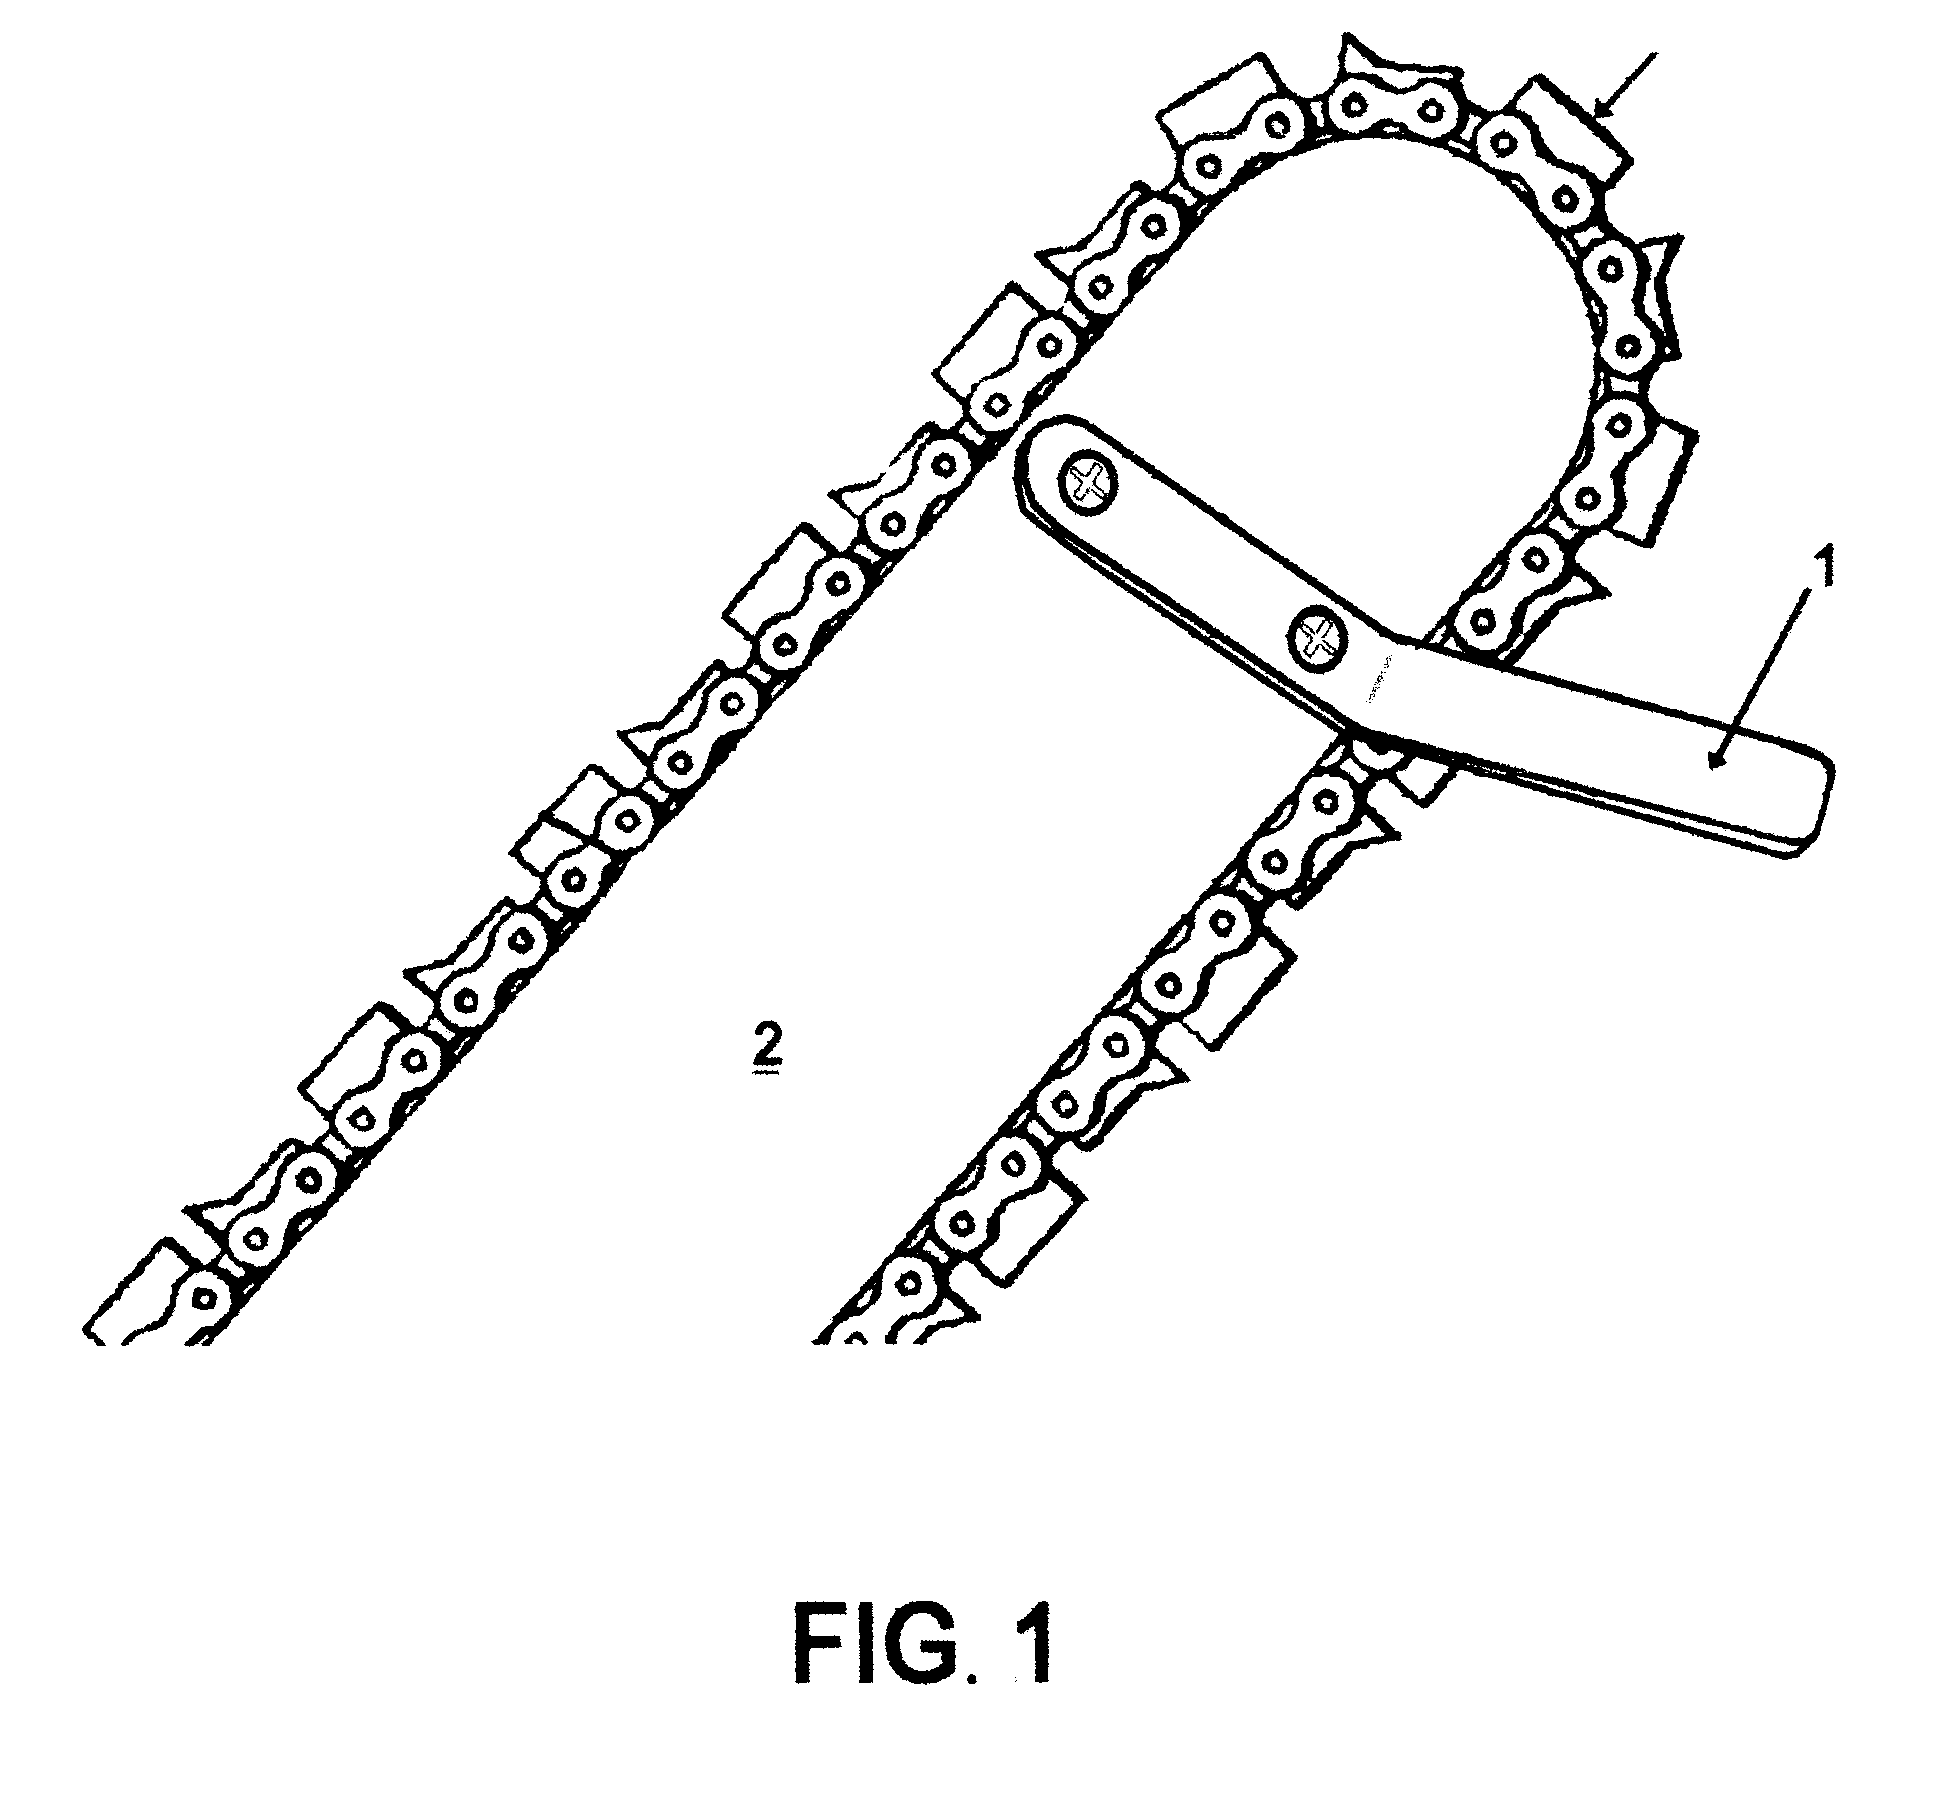 Chain saw guide bar attachment used to simplify the cutting of whippy branches and the like